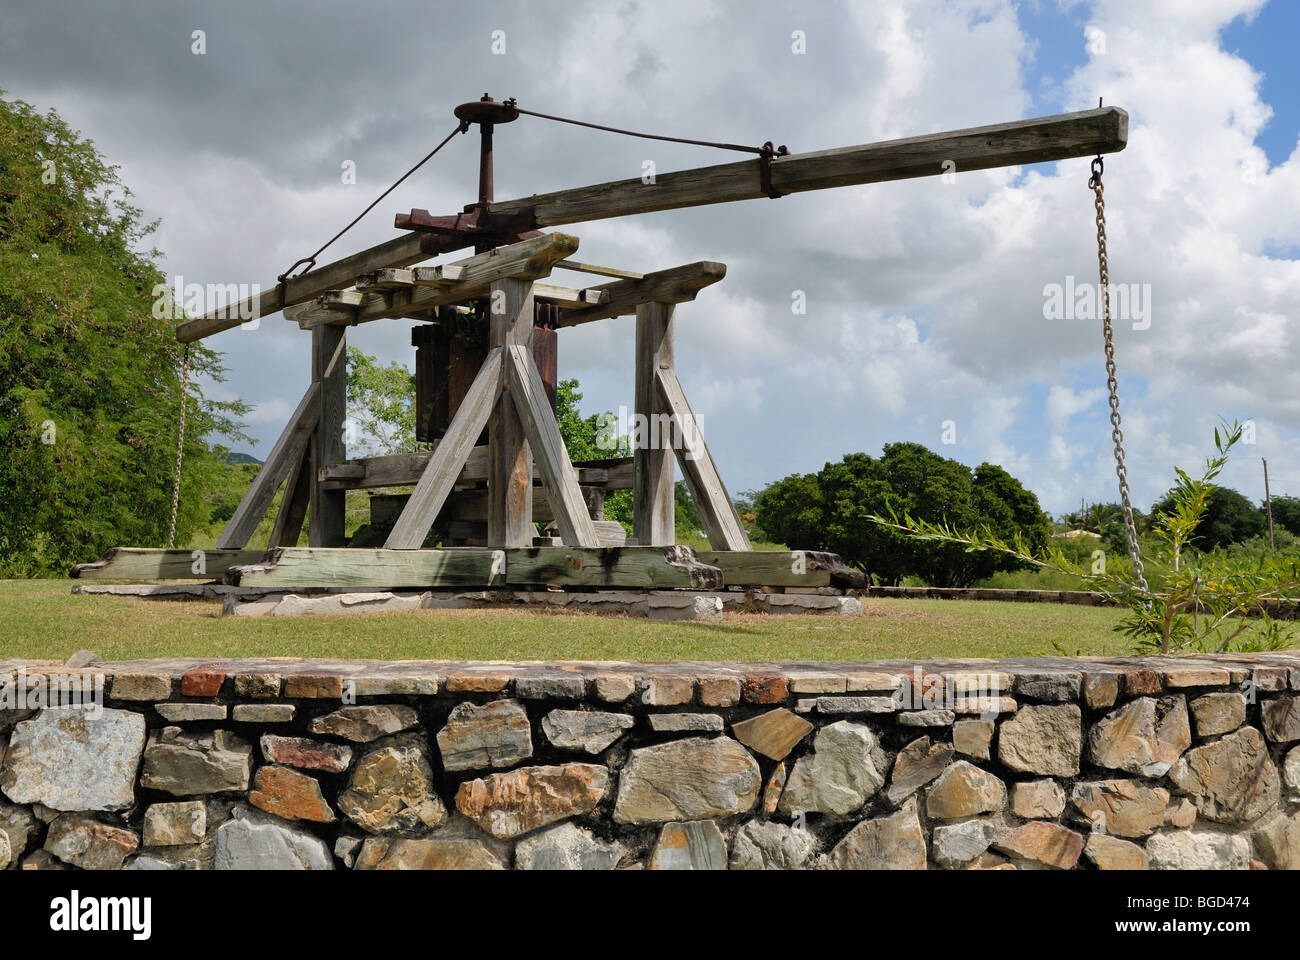 Historical, sugar cane press operated by draft animals, Estate Whim Museum, St. Croix island, U.S. Virgin Islands, United States Stock Photo